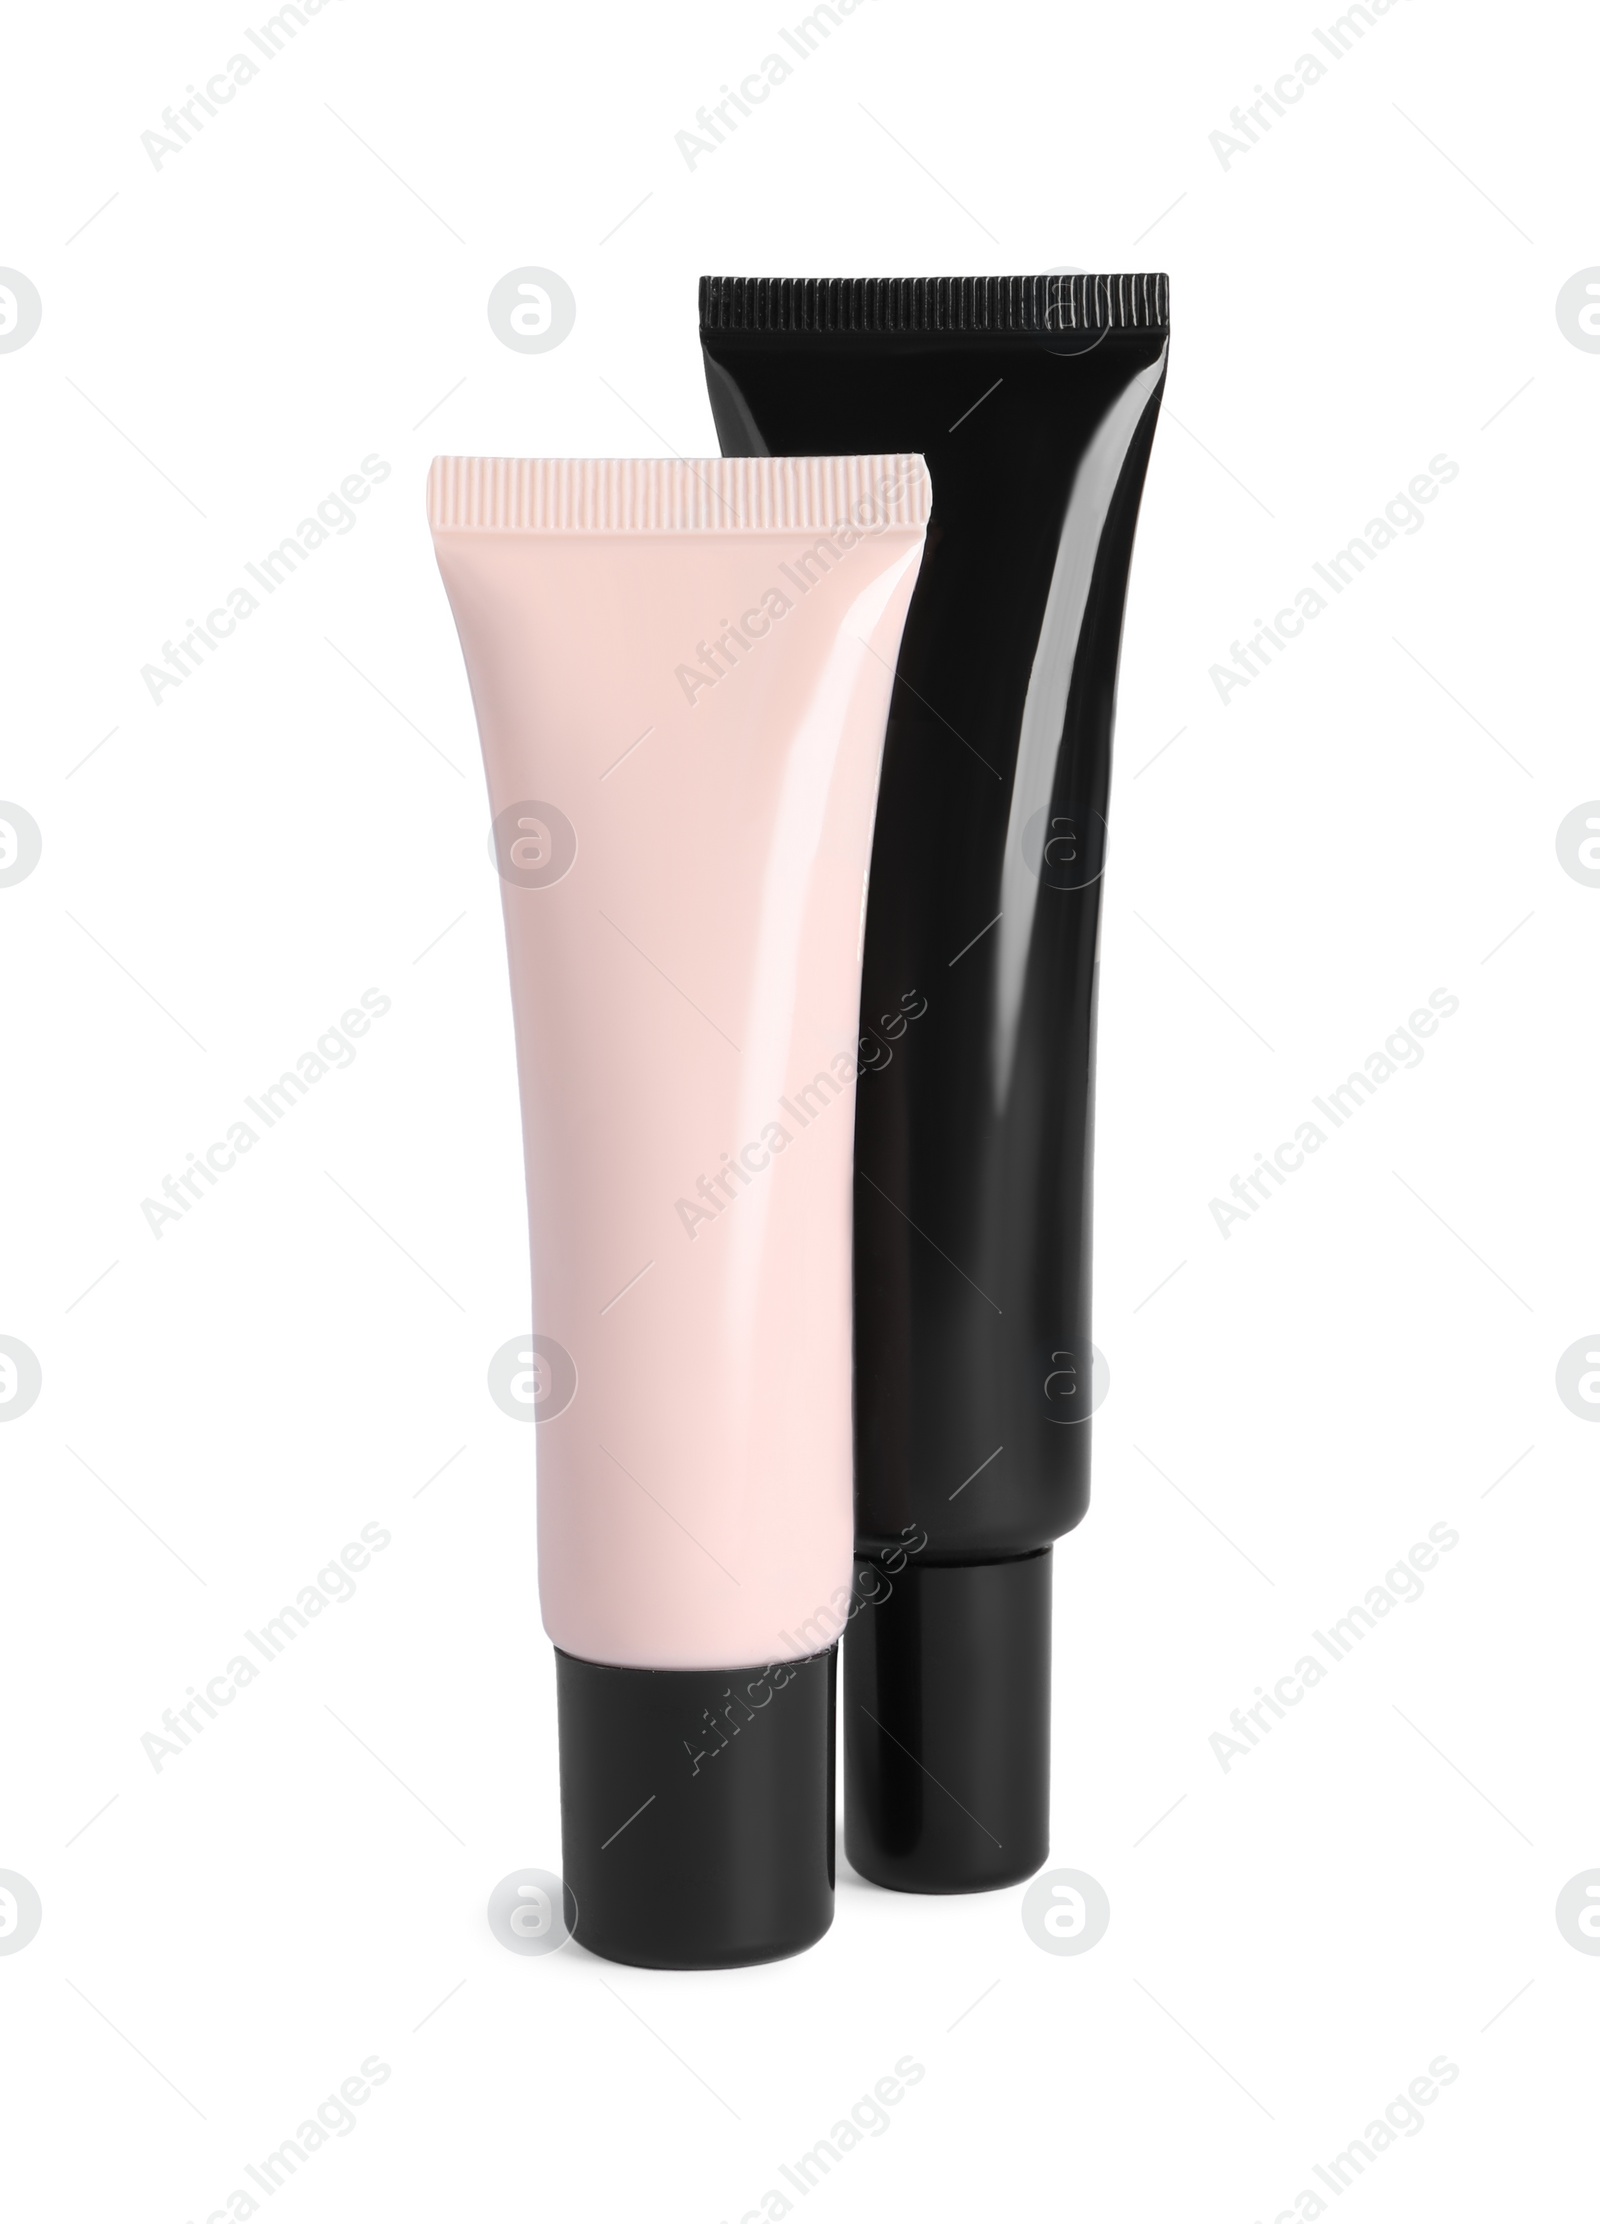 Photo of Tubes of skin foundation on white background. Makeup product